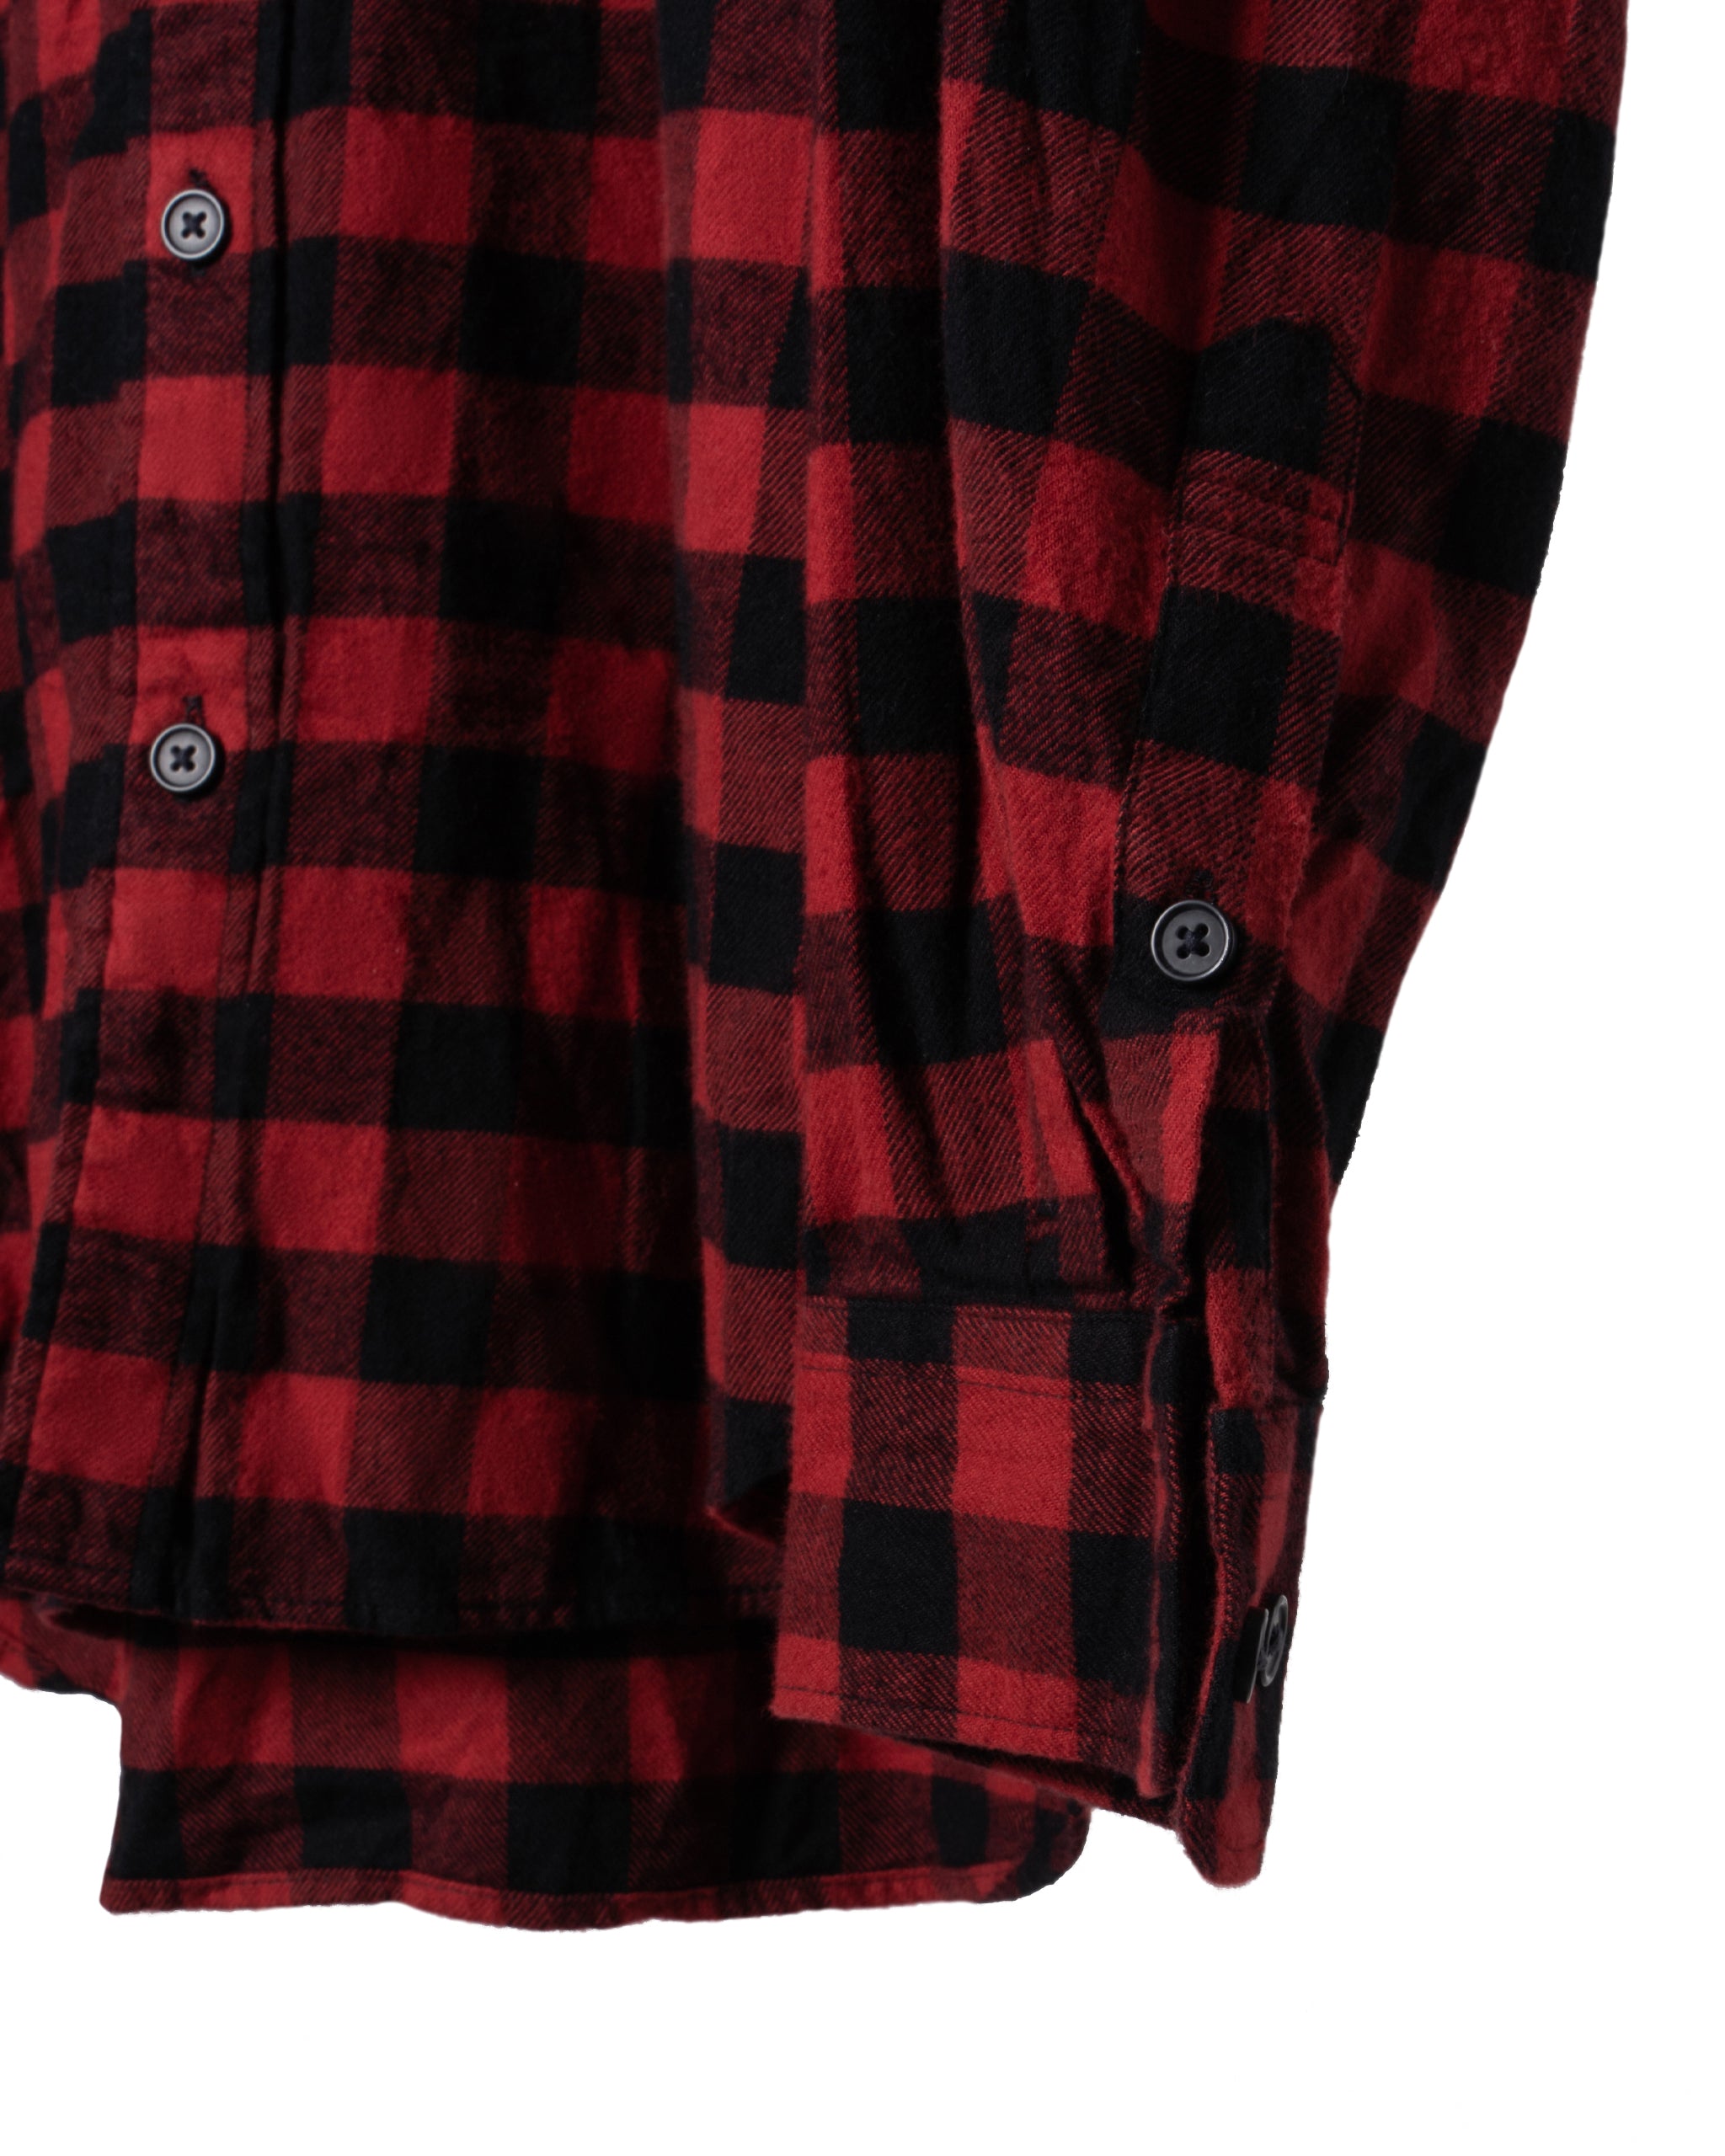 VINTAGE US FLANNEL RED HOT CHILLI PEPERS SHIRT